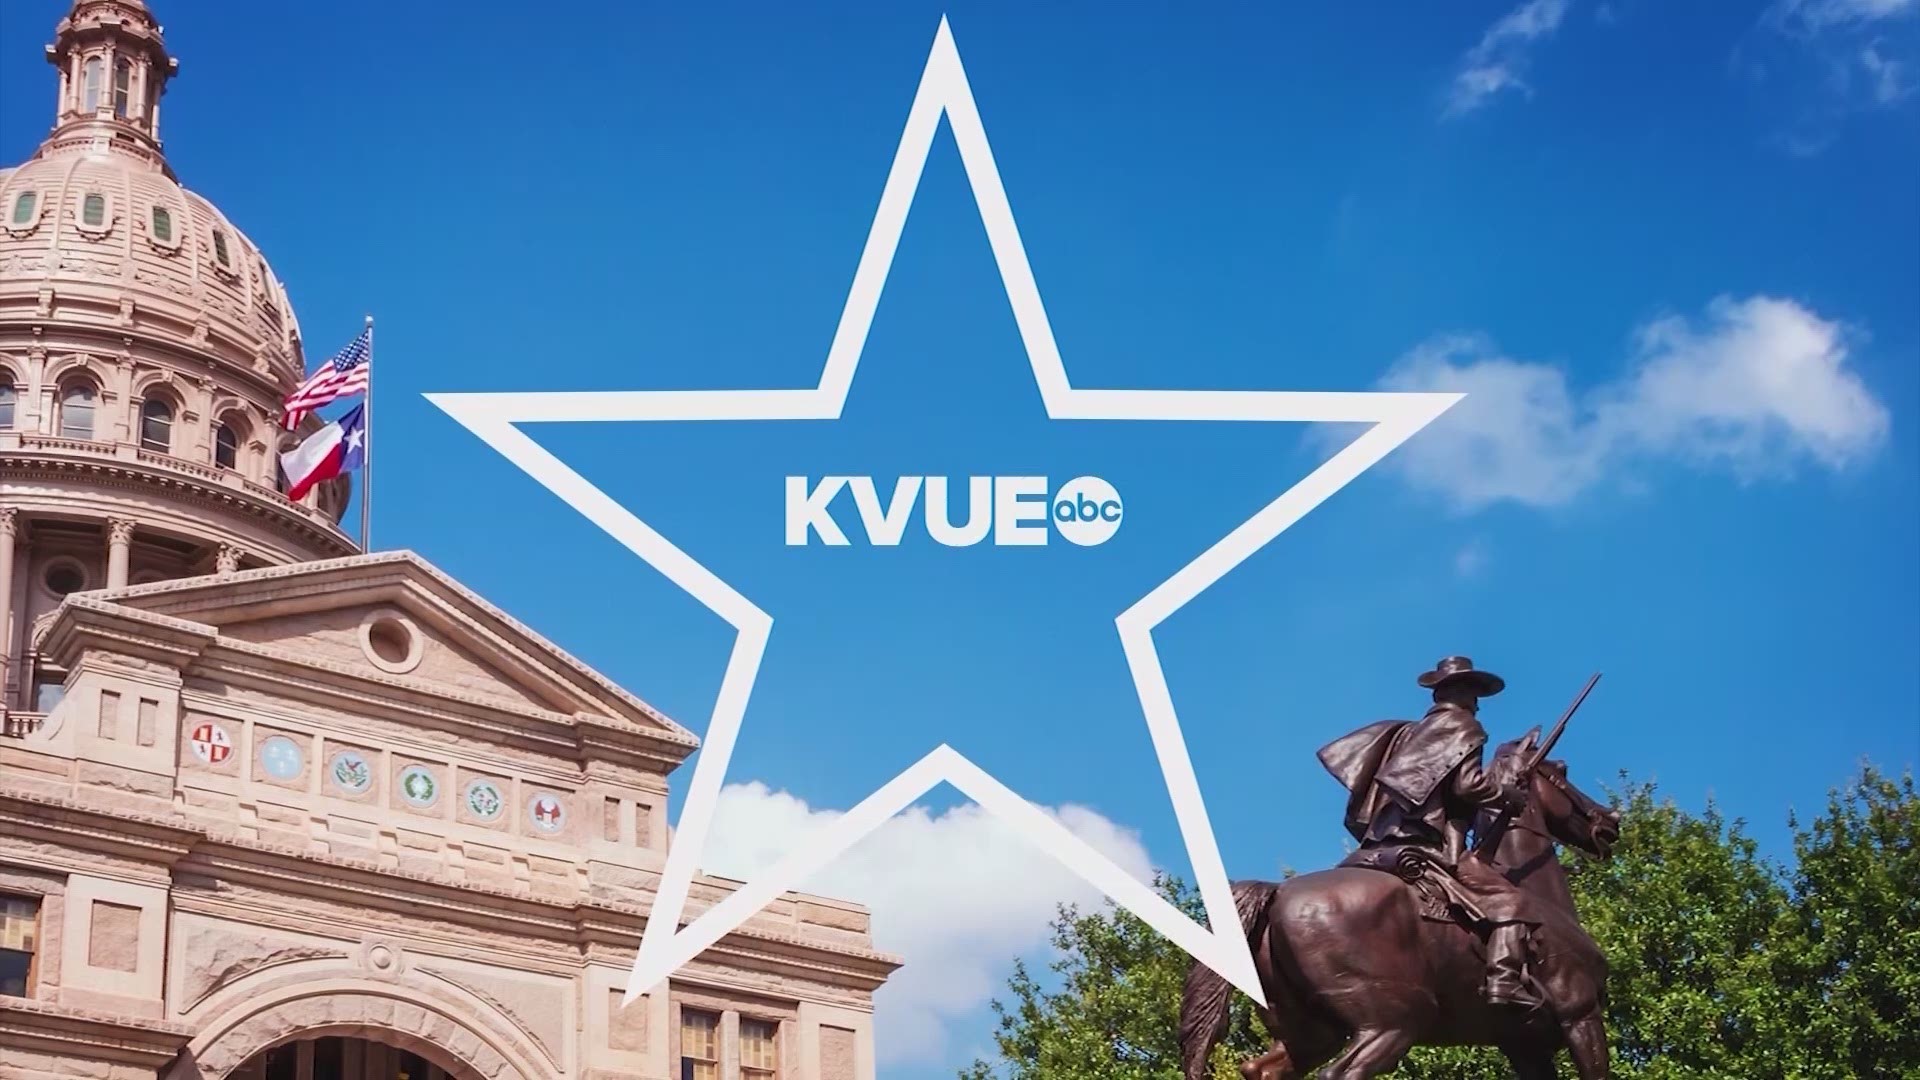 Ross Ramsey, executive editor and co-founder of The Texas Tribune, spoke with KVUE's Ashley Goudeau about the budget passed by the Texas House of Representatives.